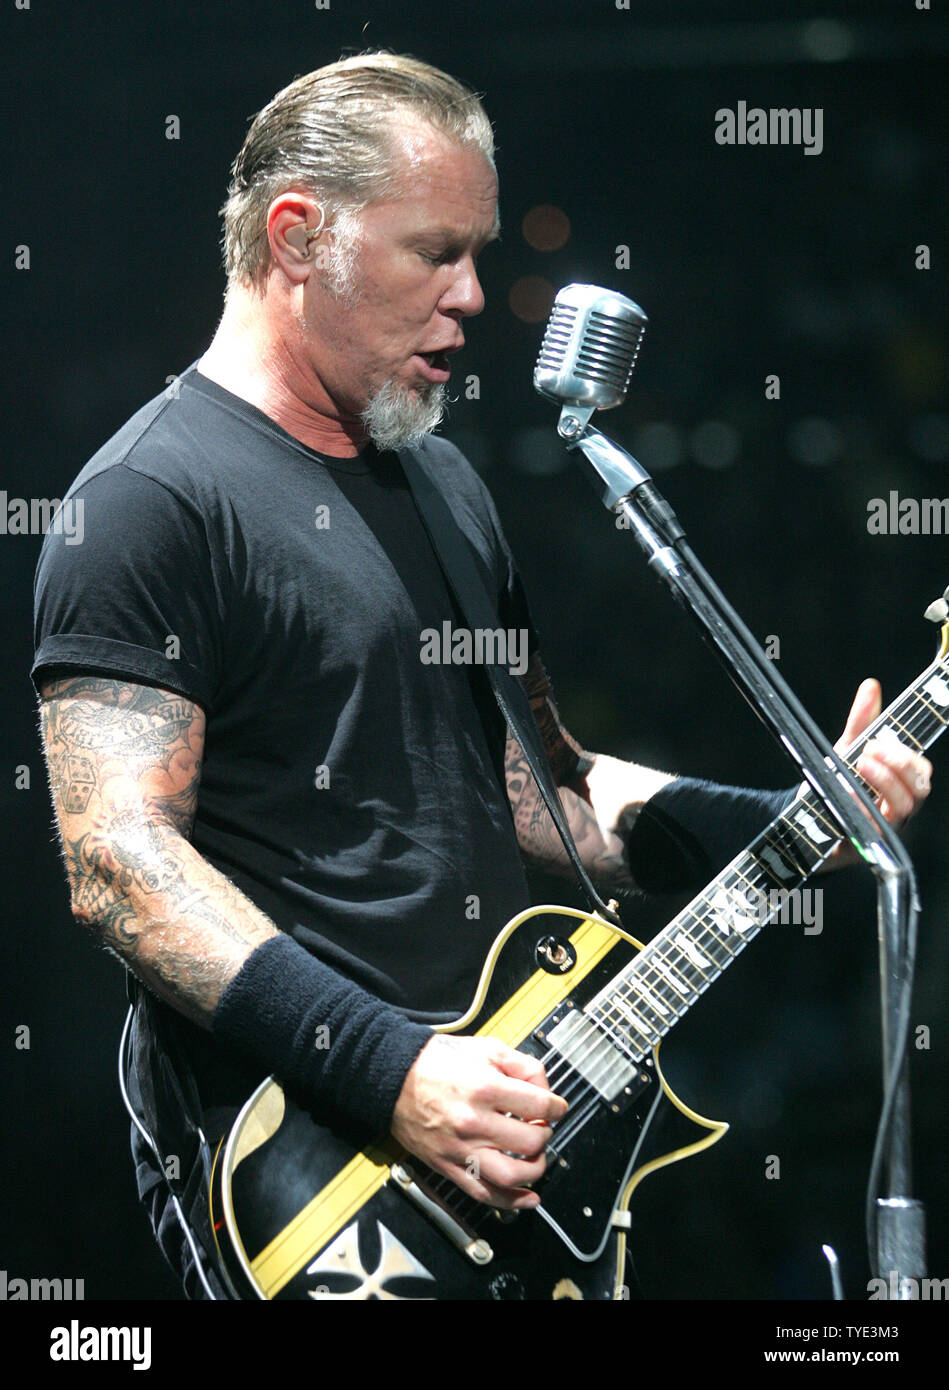 James Hetfield with Metallica performs in concert at the BankAtlantic Center in Sunrise, Florida on October 1, 2009.  UPI/Michael Bush Stock Photo